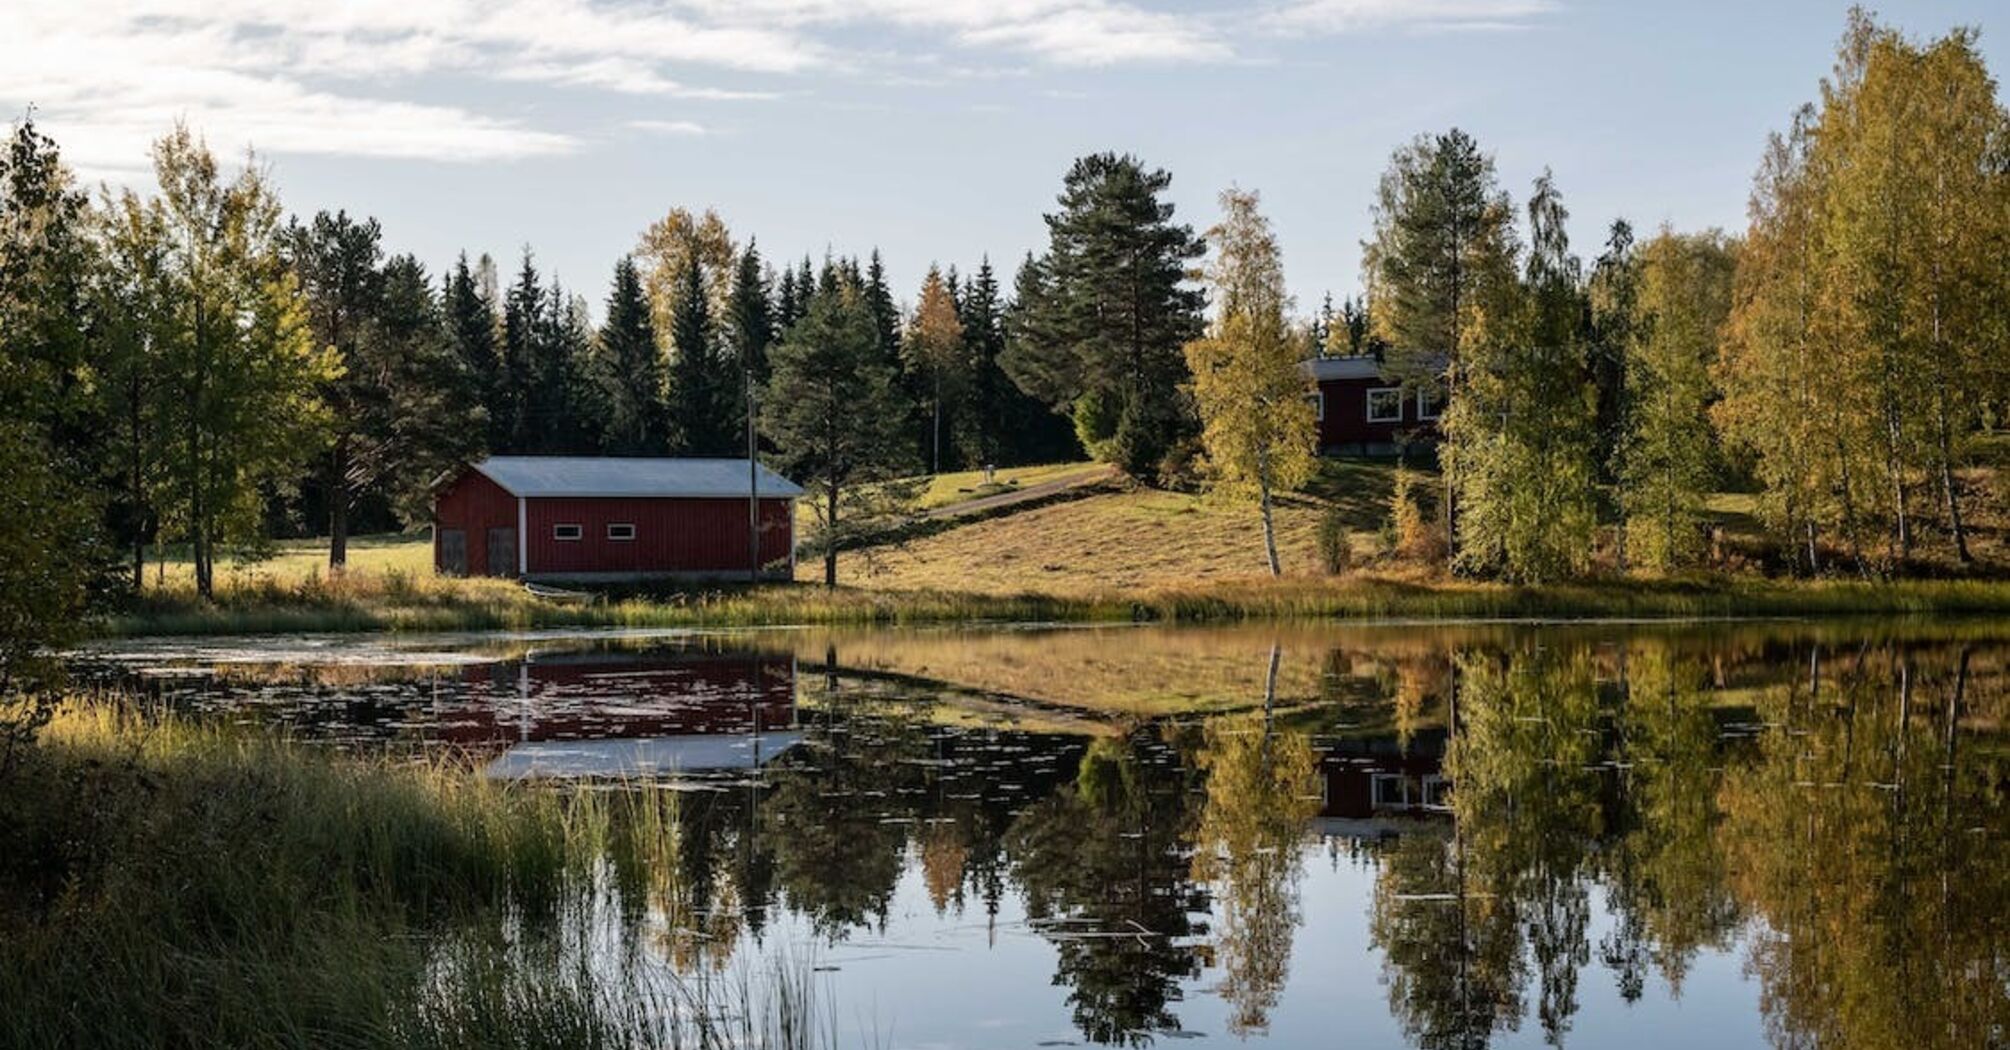 The Finnish government wants to completely prohibit Russians from buying real estate in the country